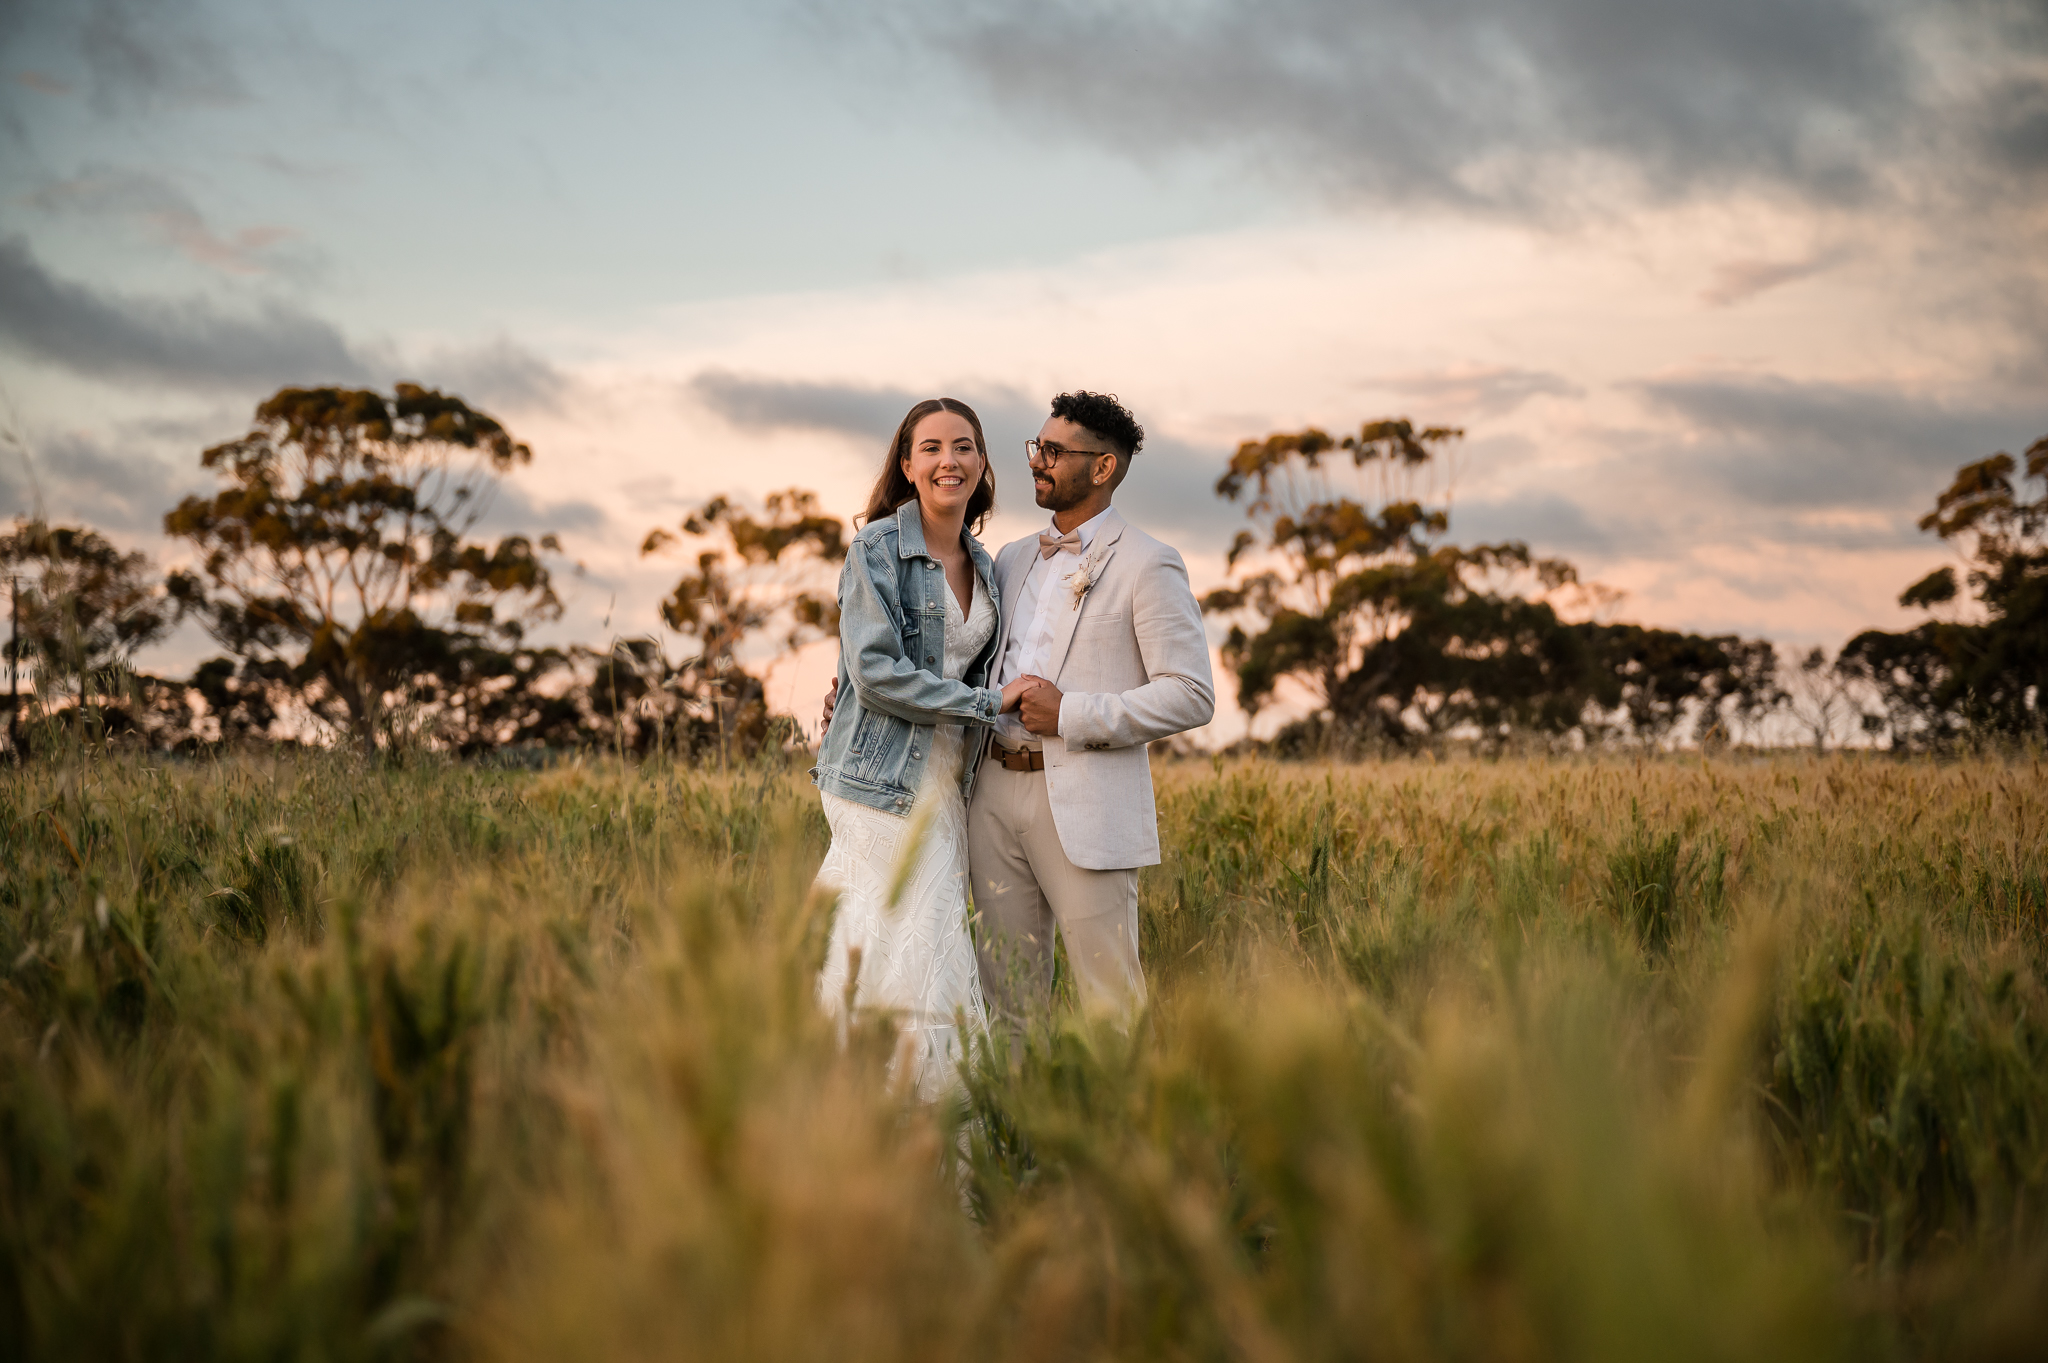 Photography Prices for Elopement and Micro Weddings in Adelaide